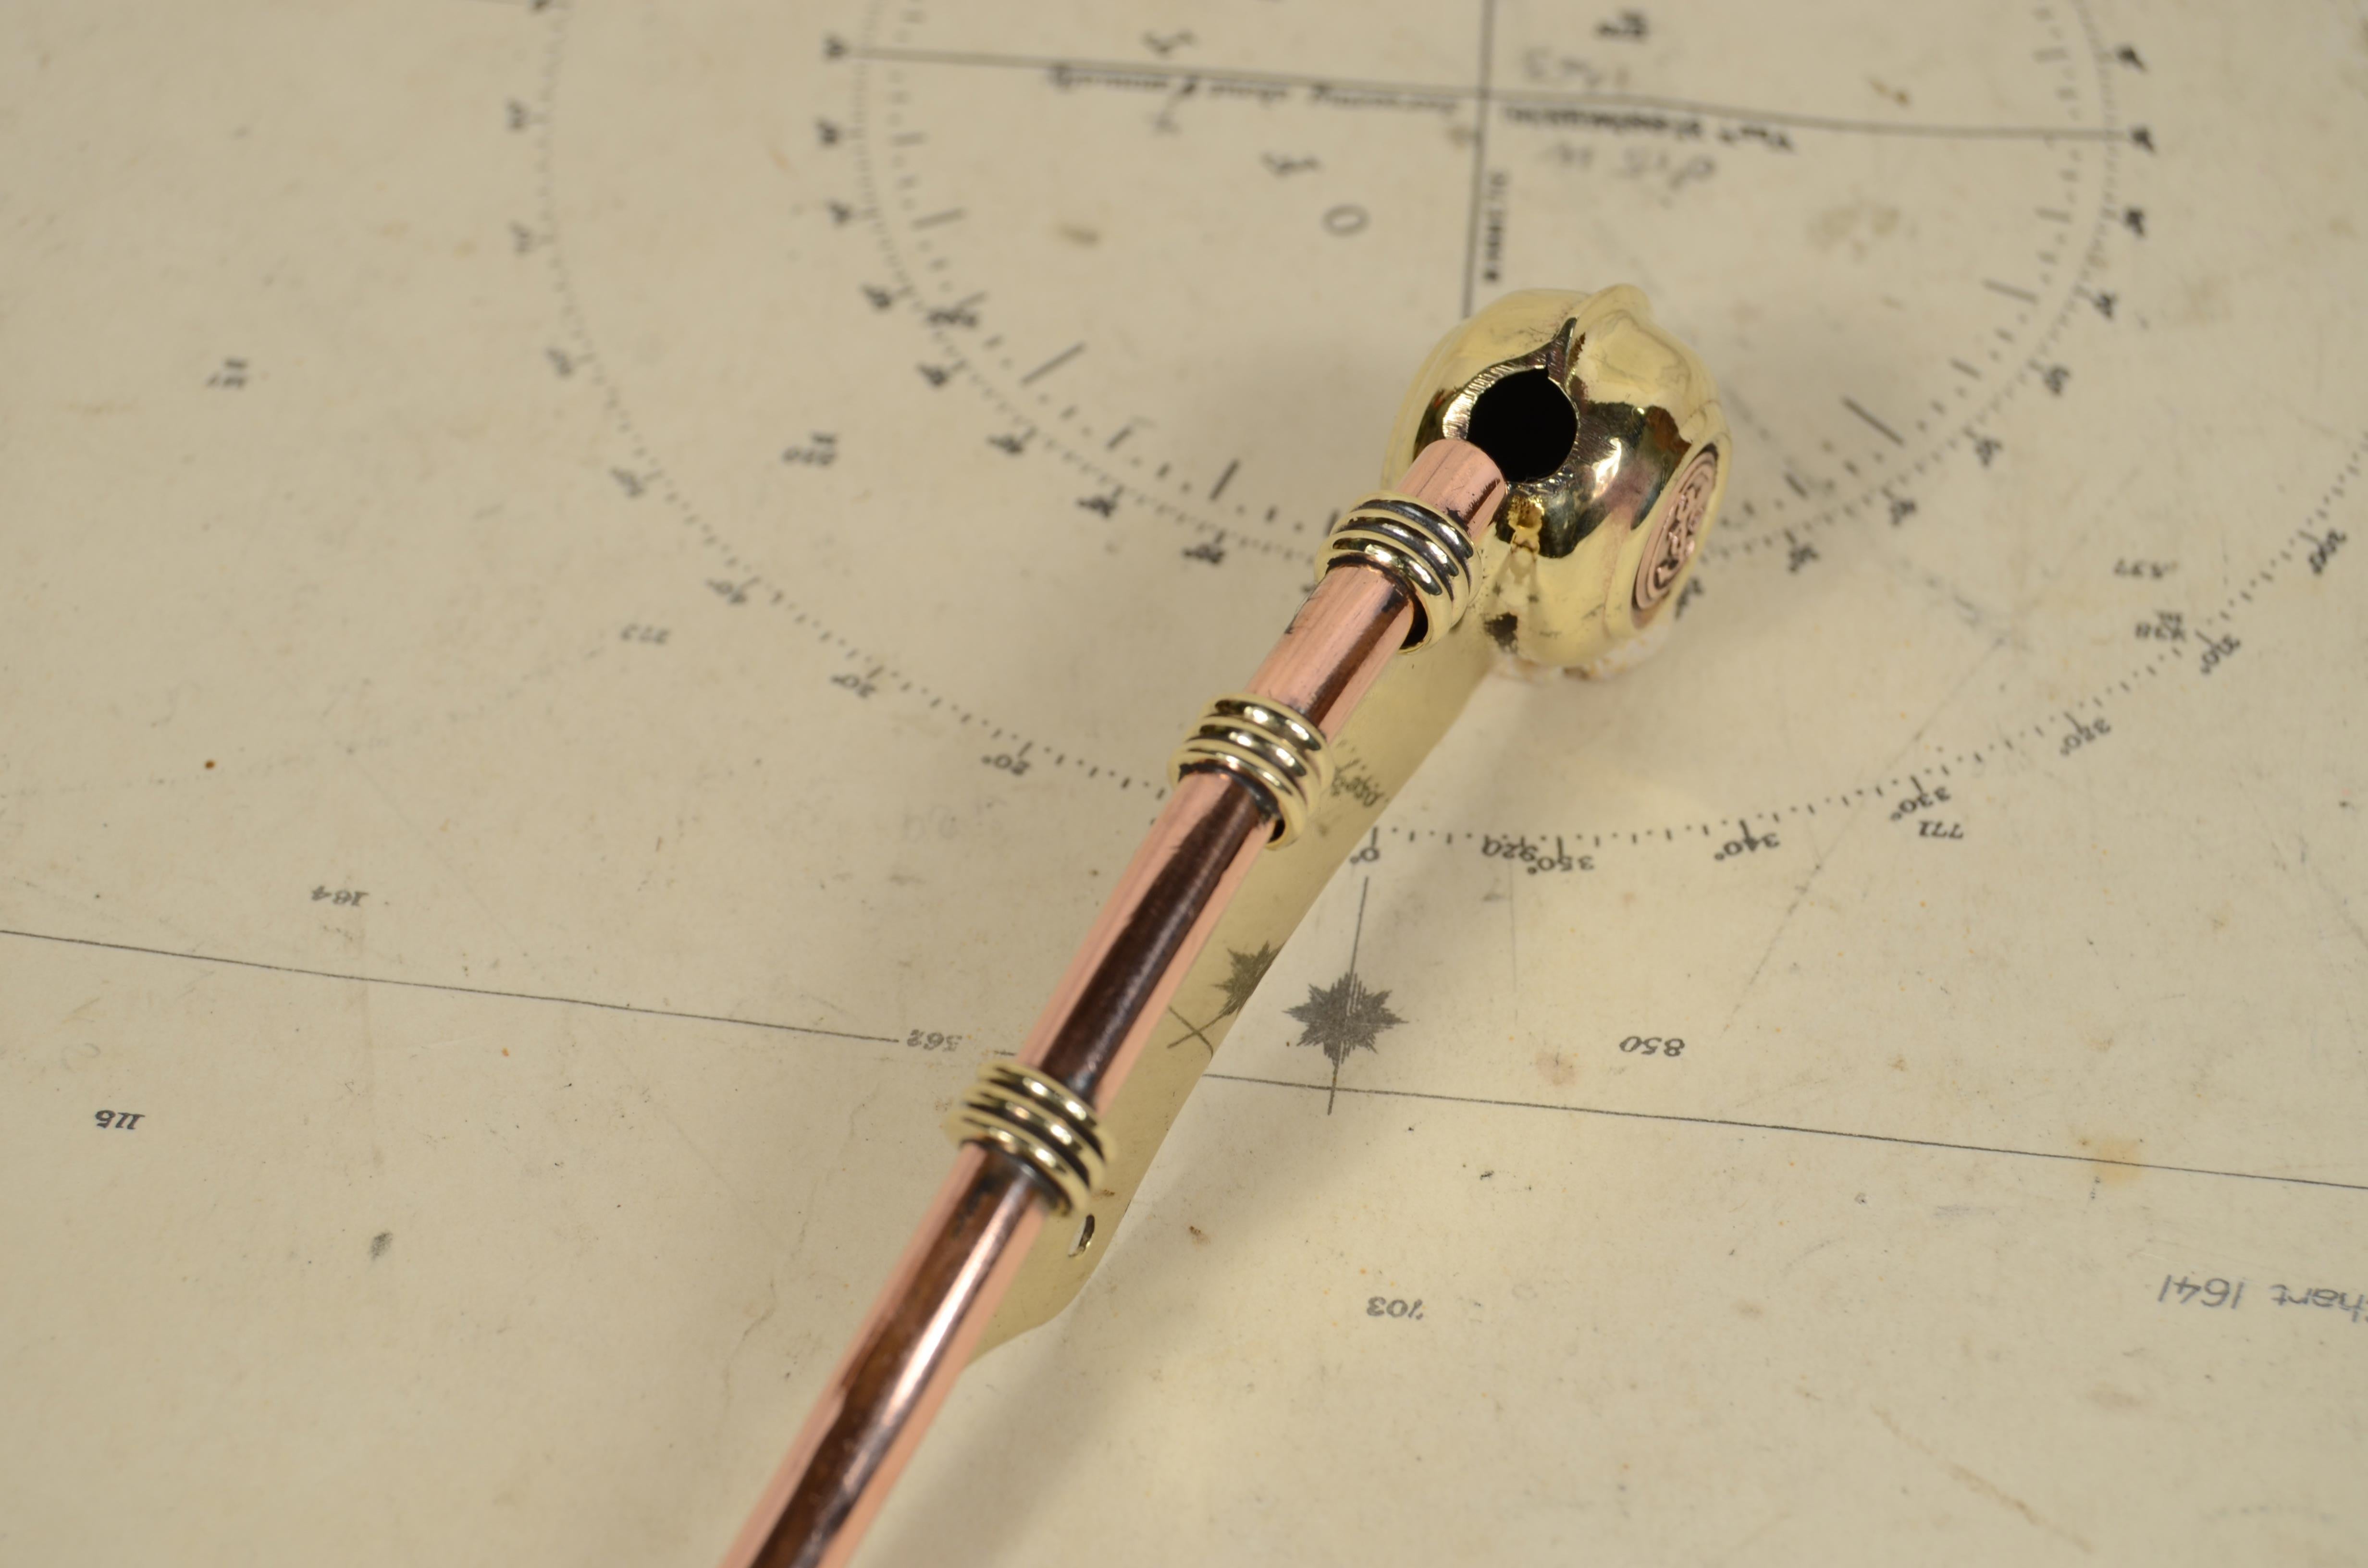 Boatswain's whistle made of brass and copper English manufacture of the 1920s, on the sides anchor. Length 13.x2.5x1.8 cm - inches 5.3x0.8x0.7. Good condition.
This type of whistle is composed of a small tube, called a cannon, attached to the end of